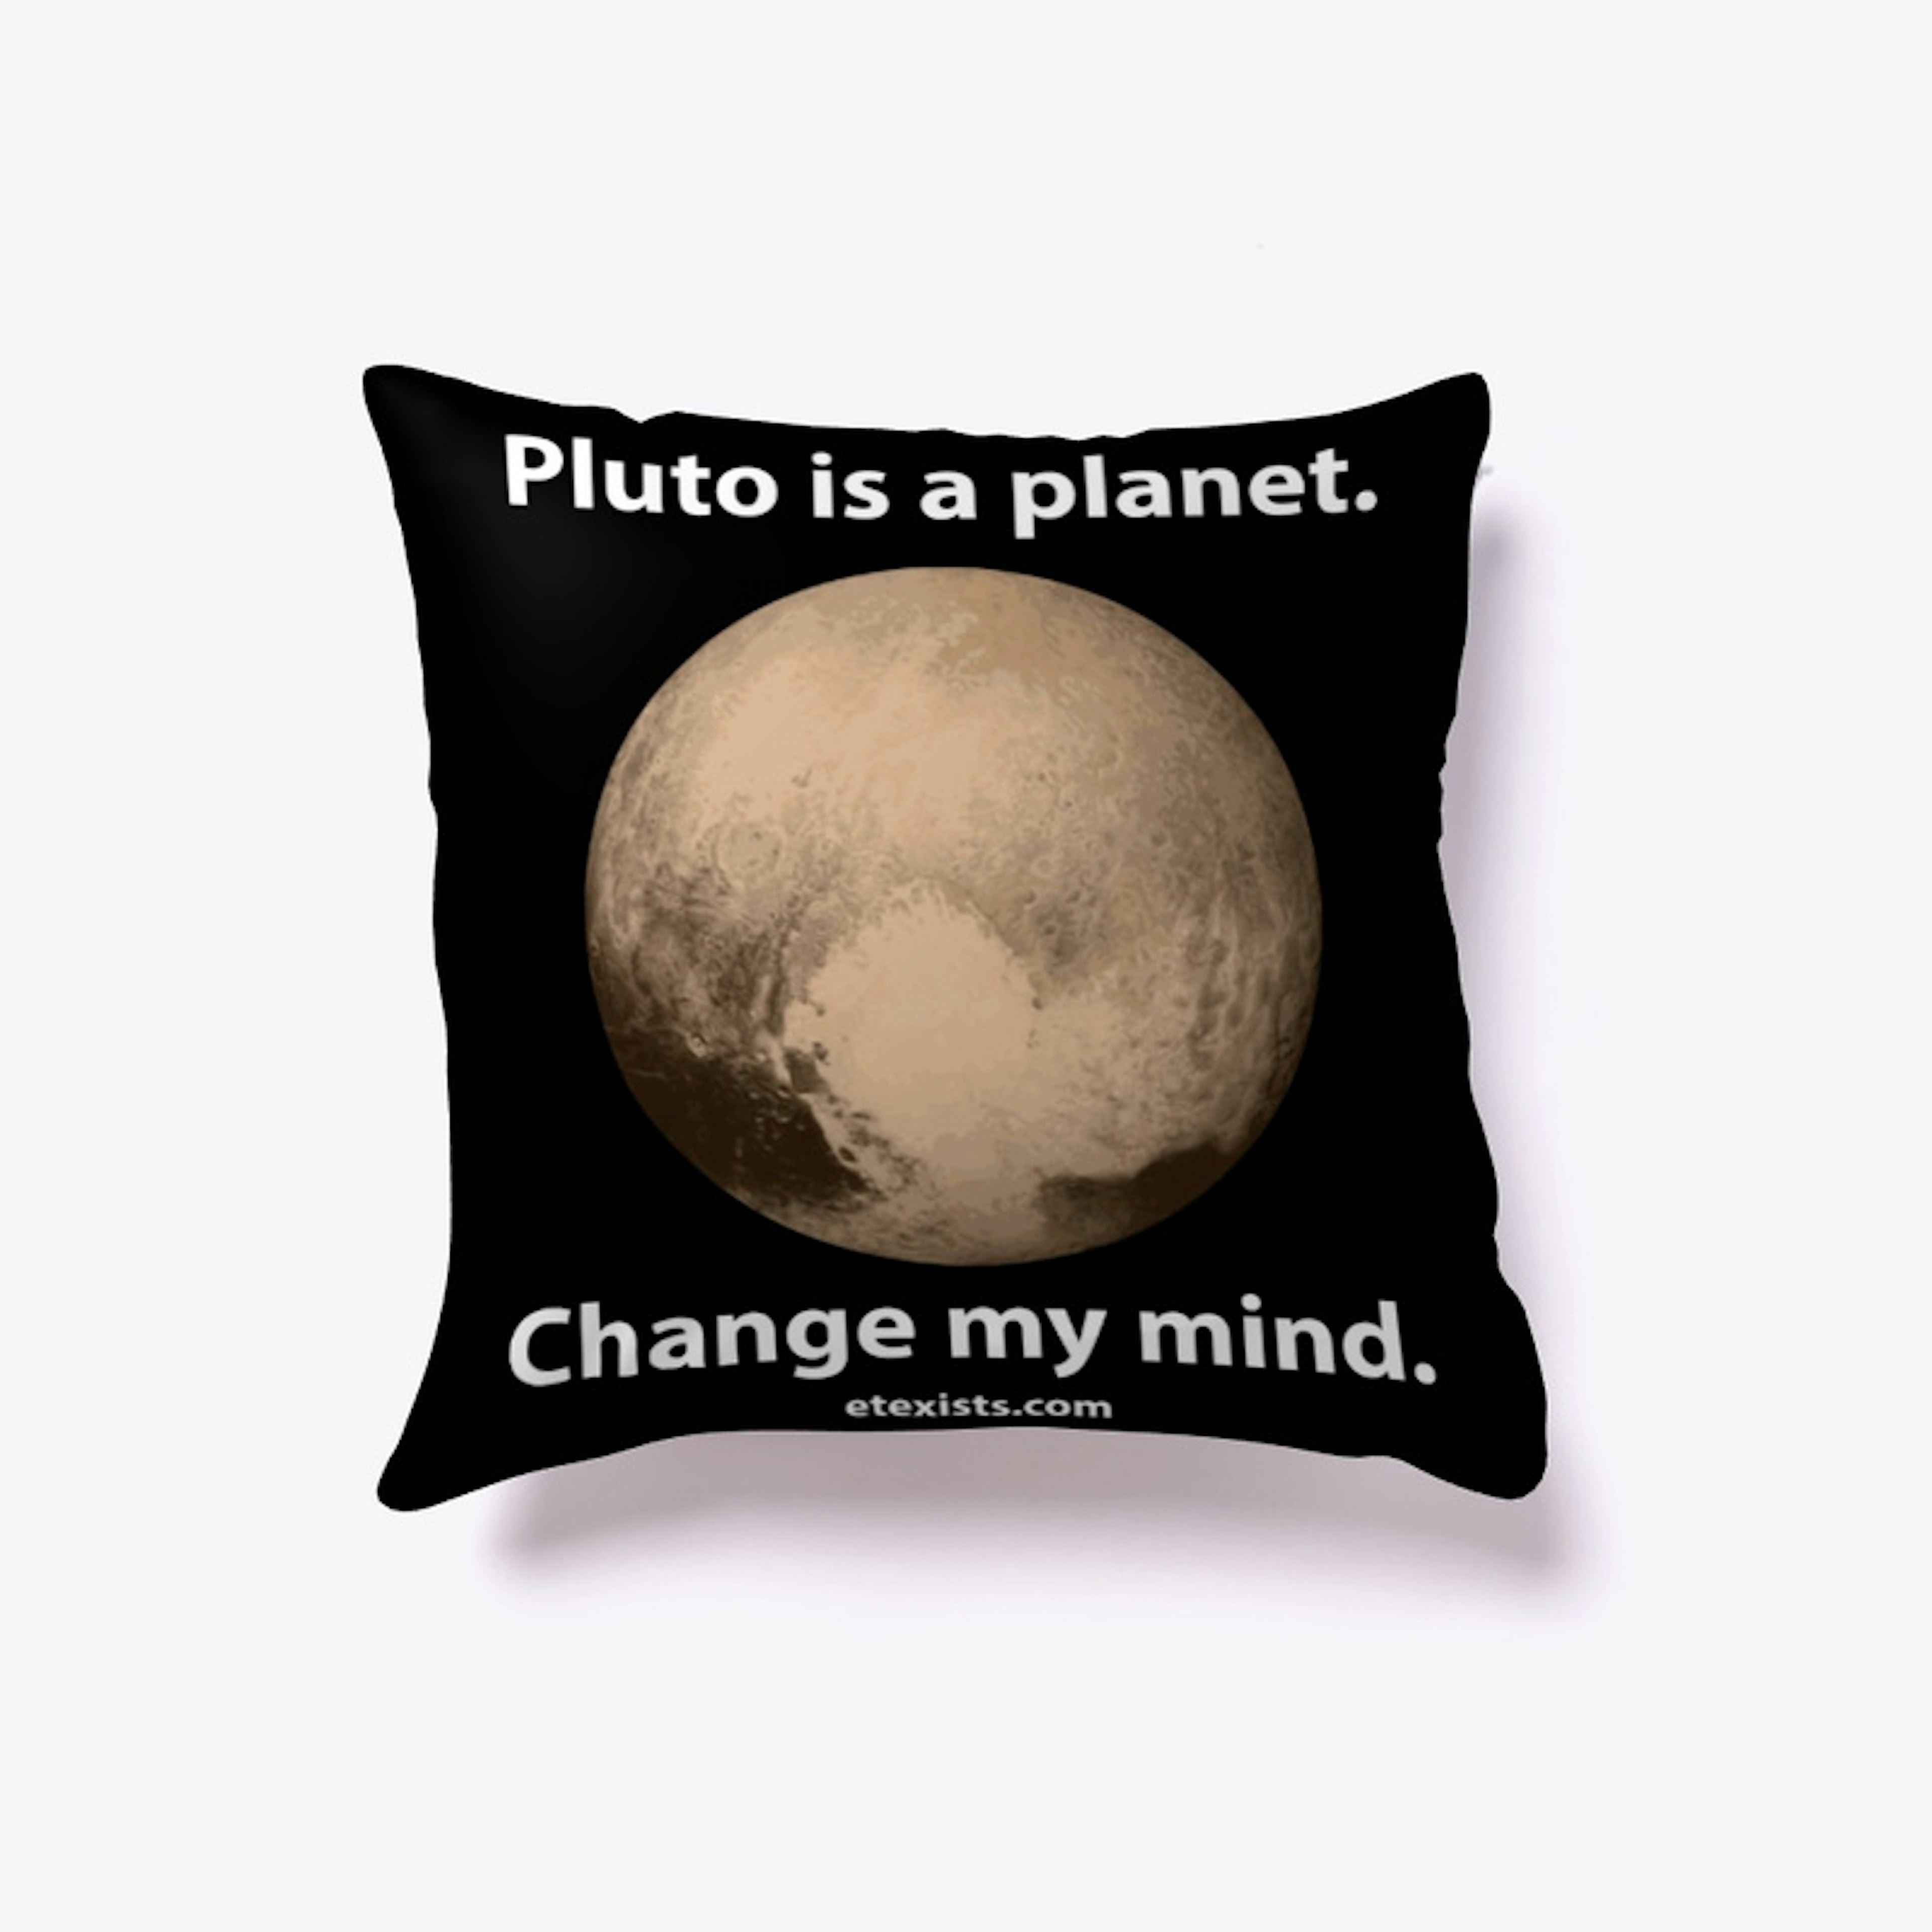 Pluto is a planet...